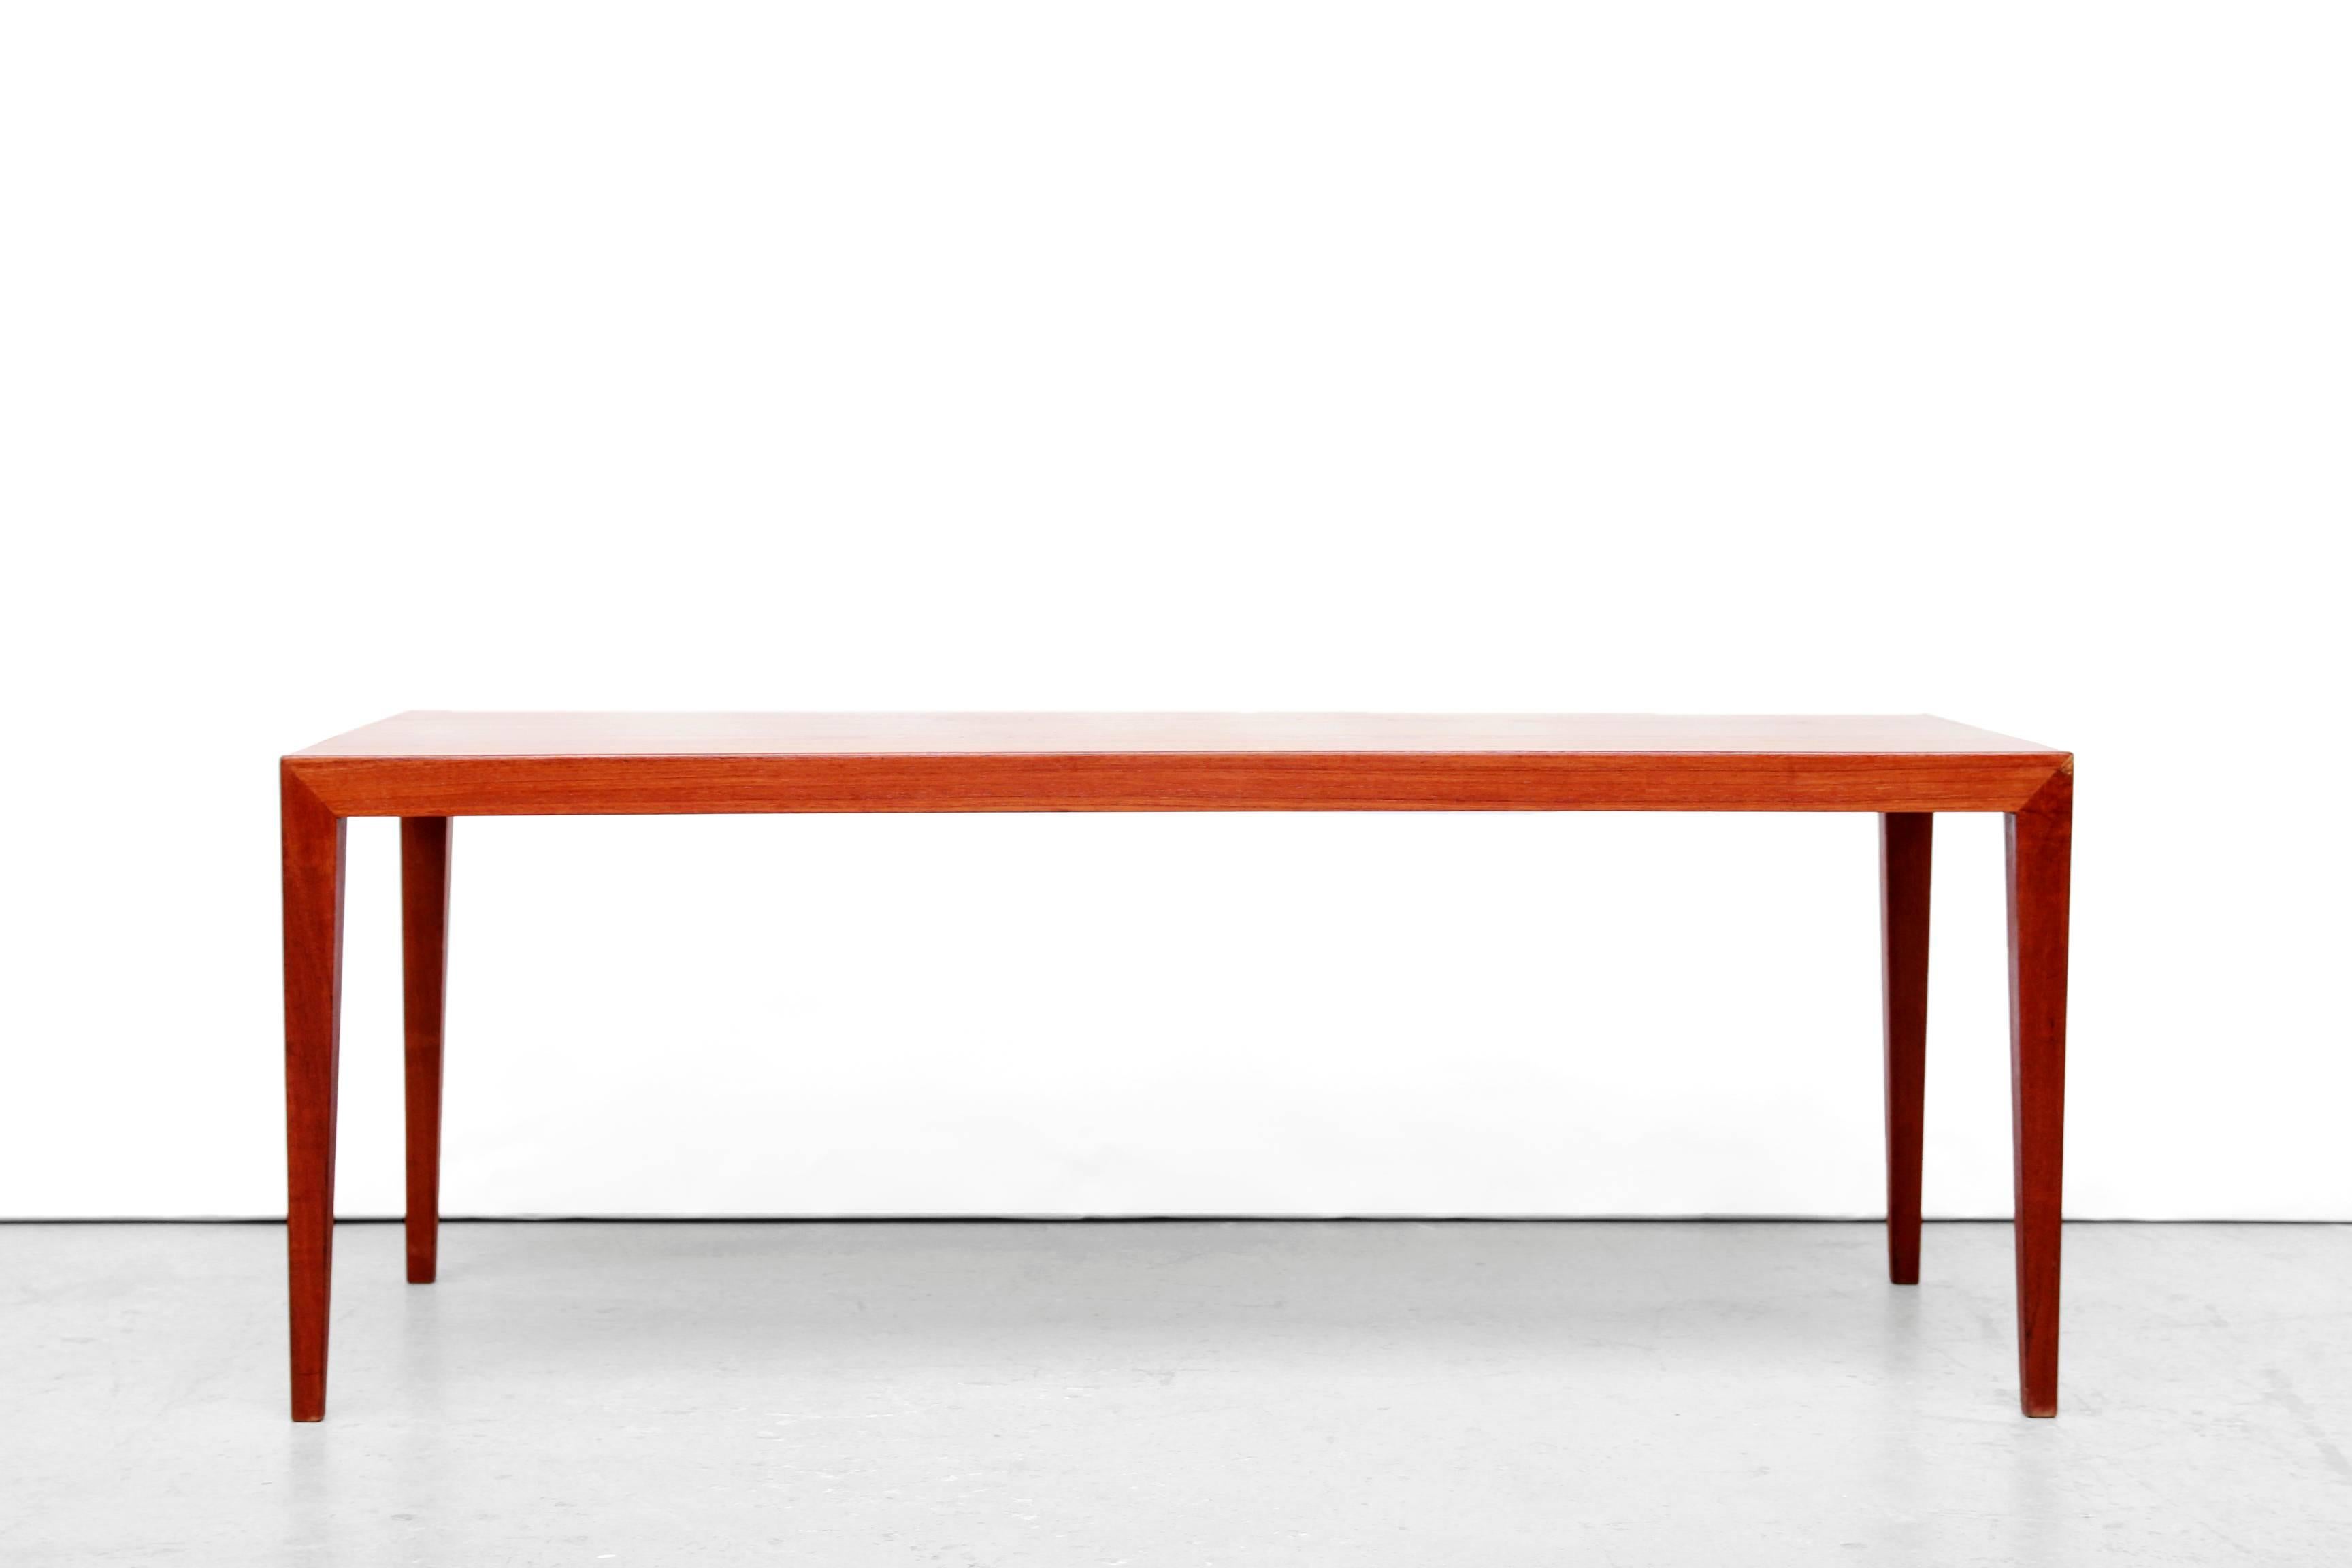 This Danish design coffee table by Severin Hansen for Haslev Mobelfabrik is made of teak veneer. Danish quality and beautiful Scandinavian modern design. For example, check the connection of the legs to the table top. This coffee table is very